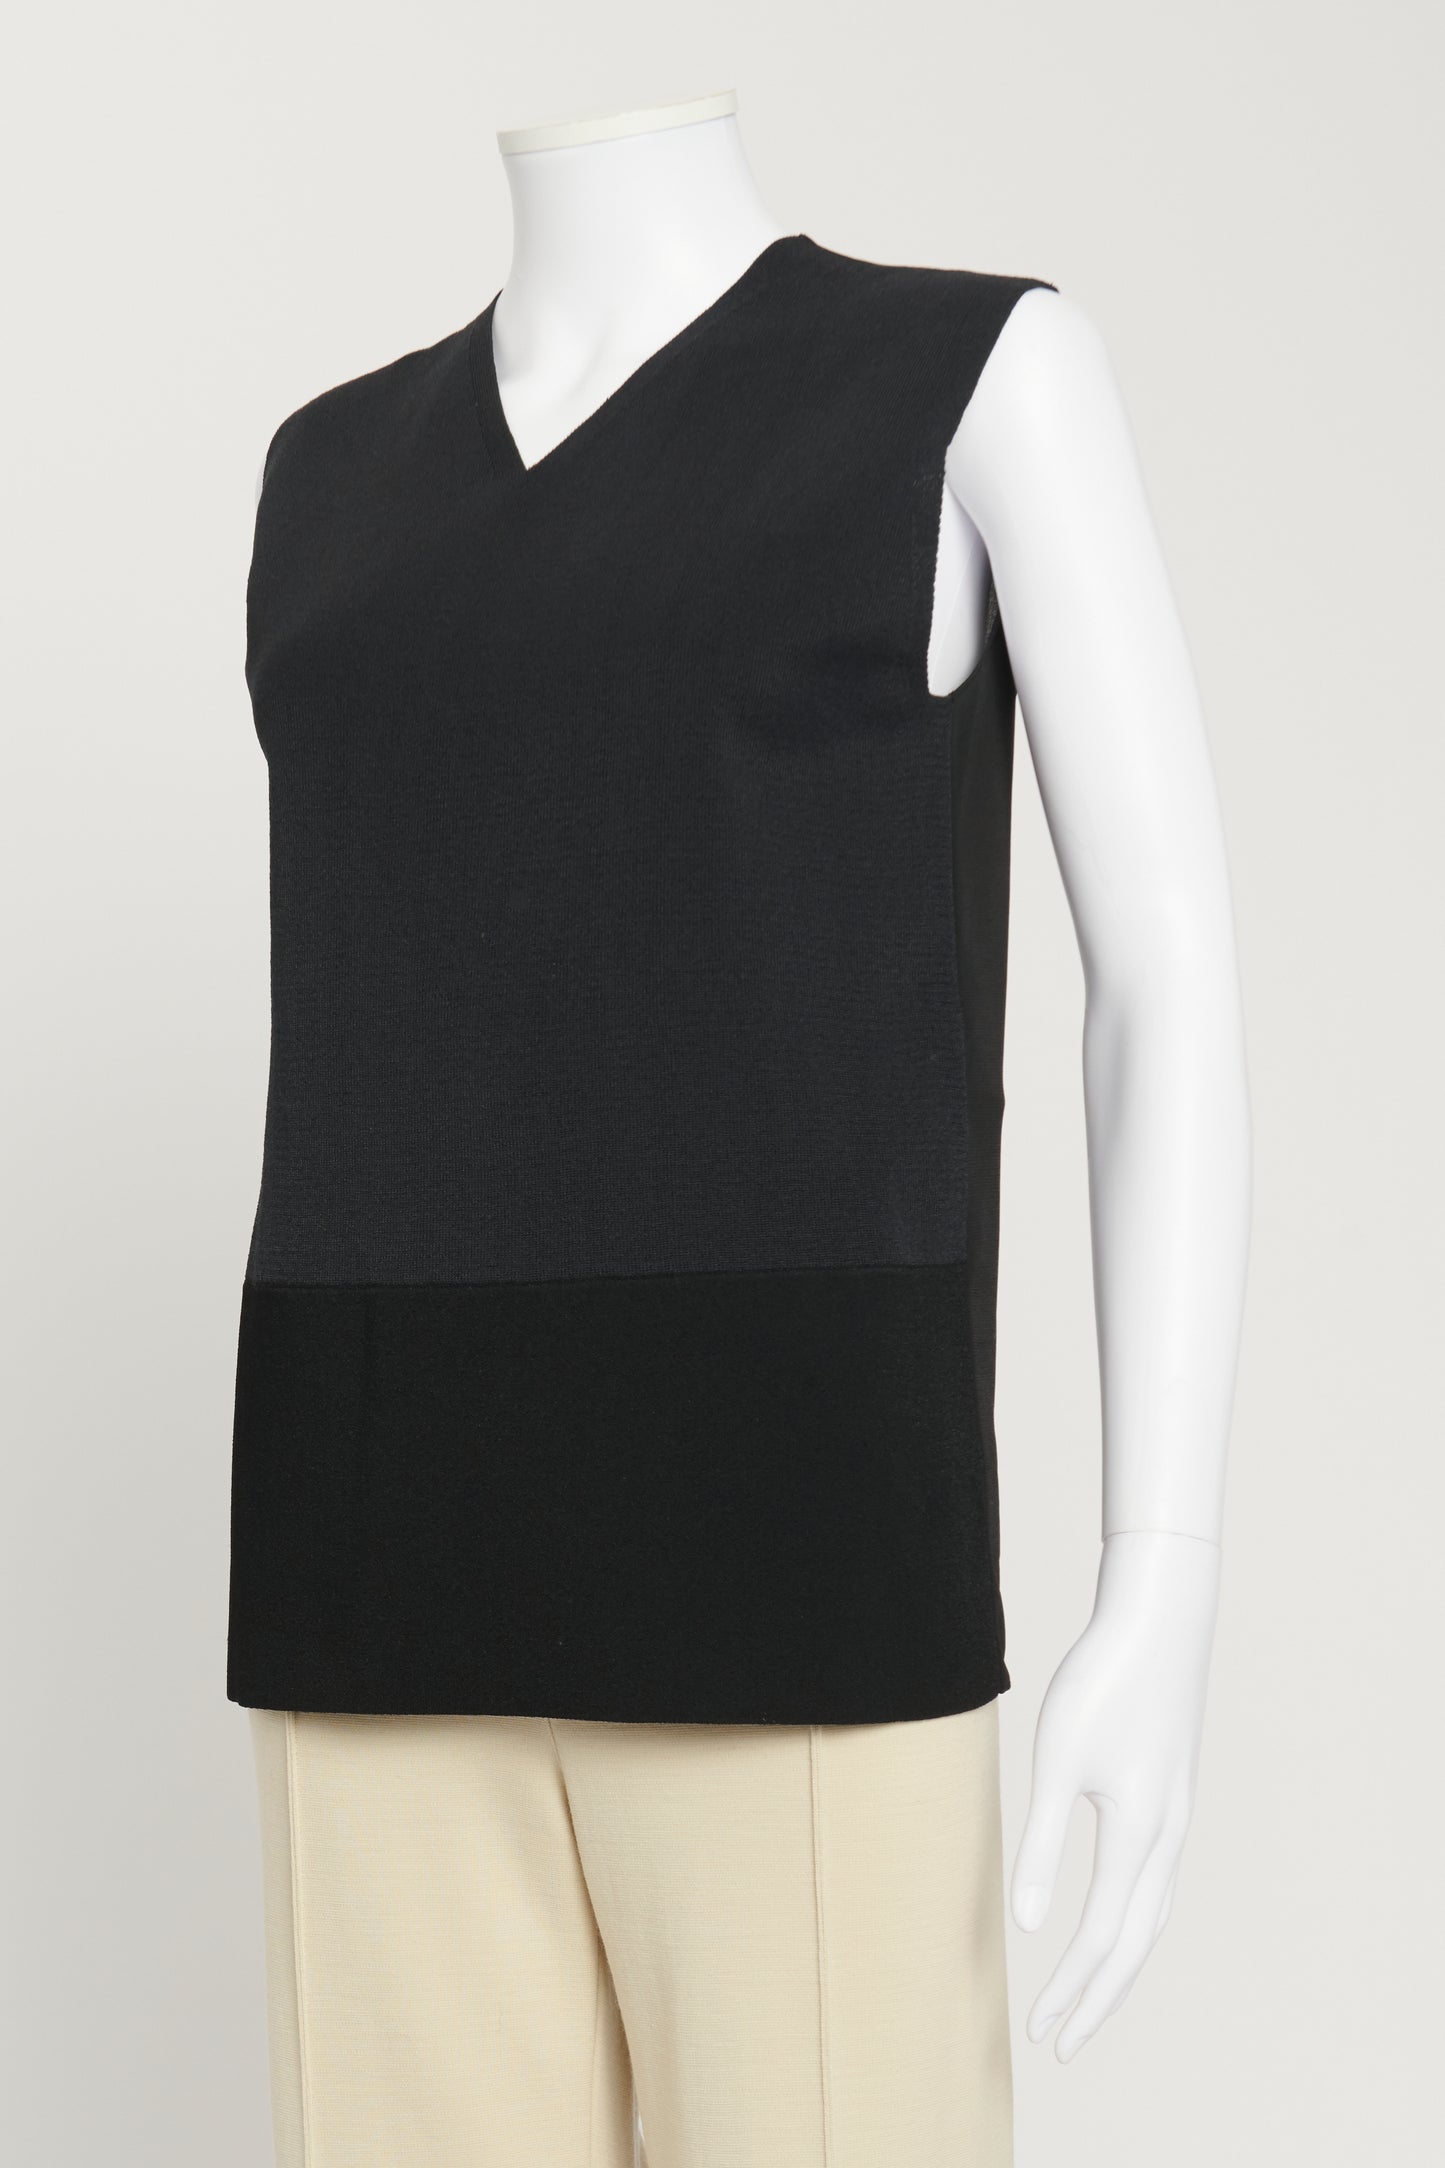 Navy Blue and Black Colour Block Top